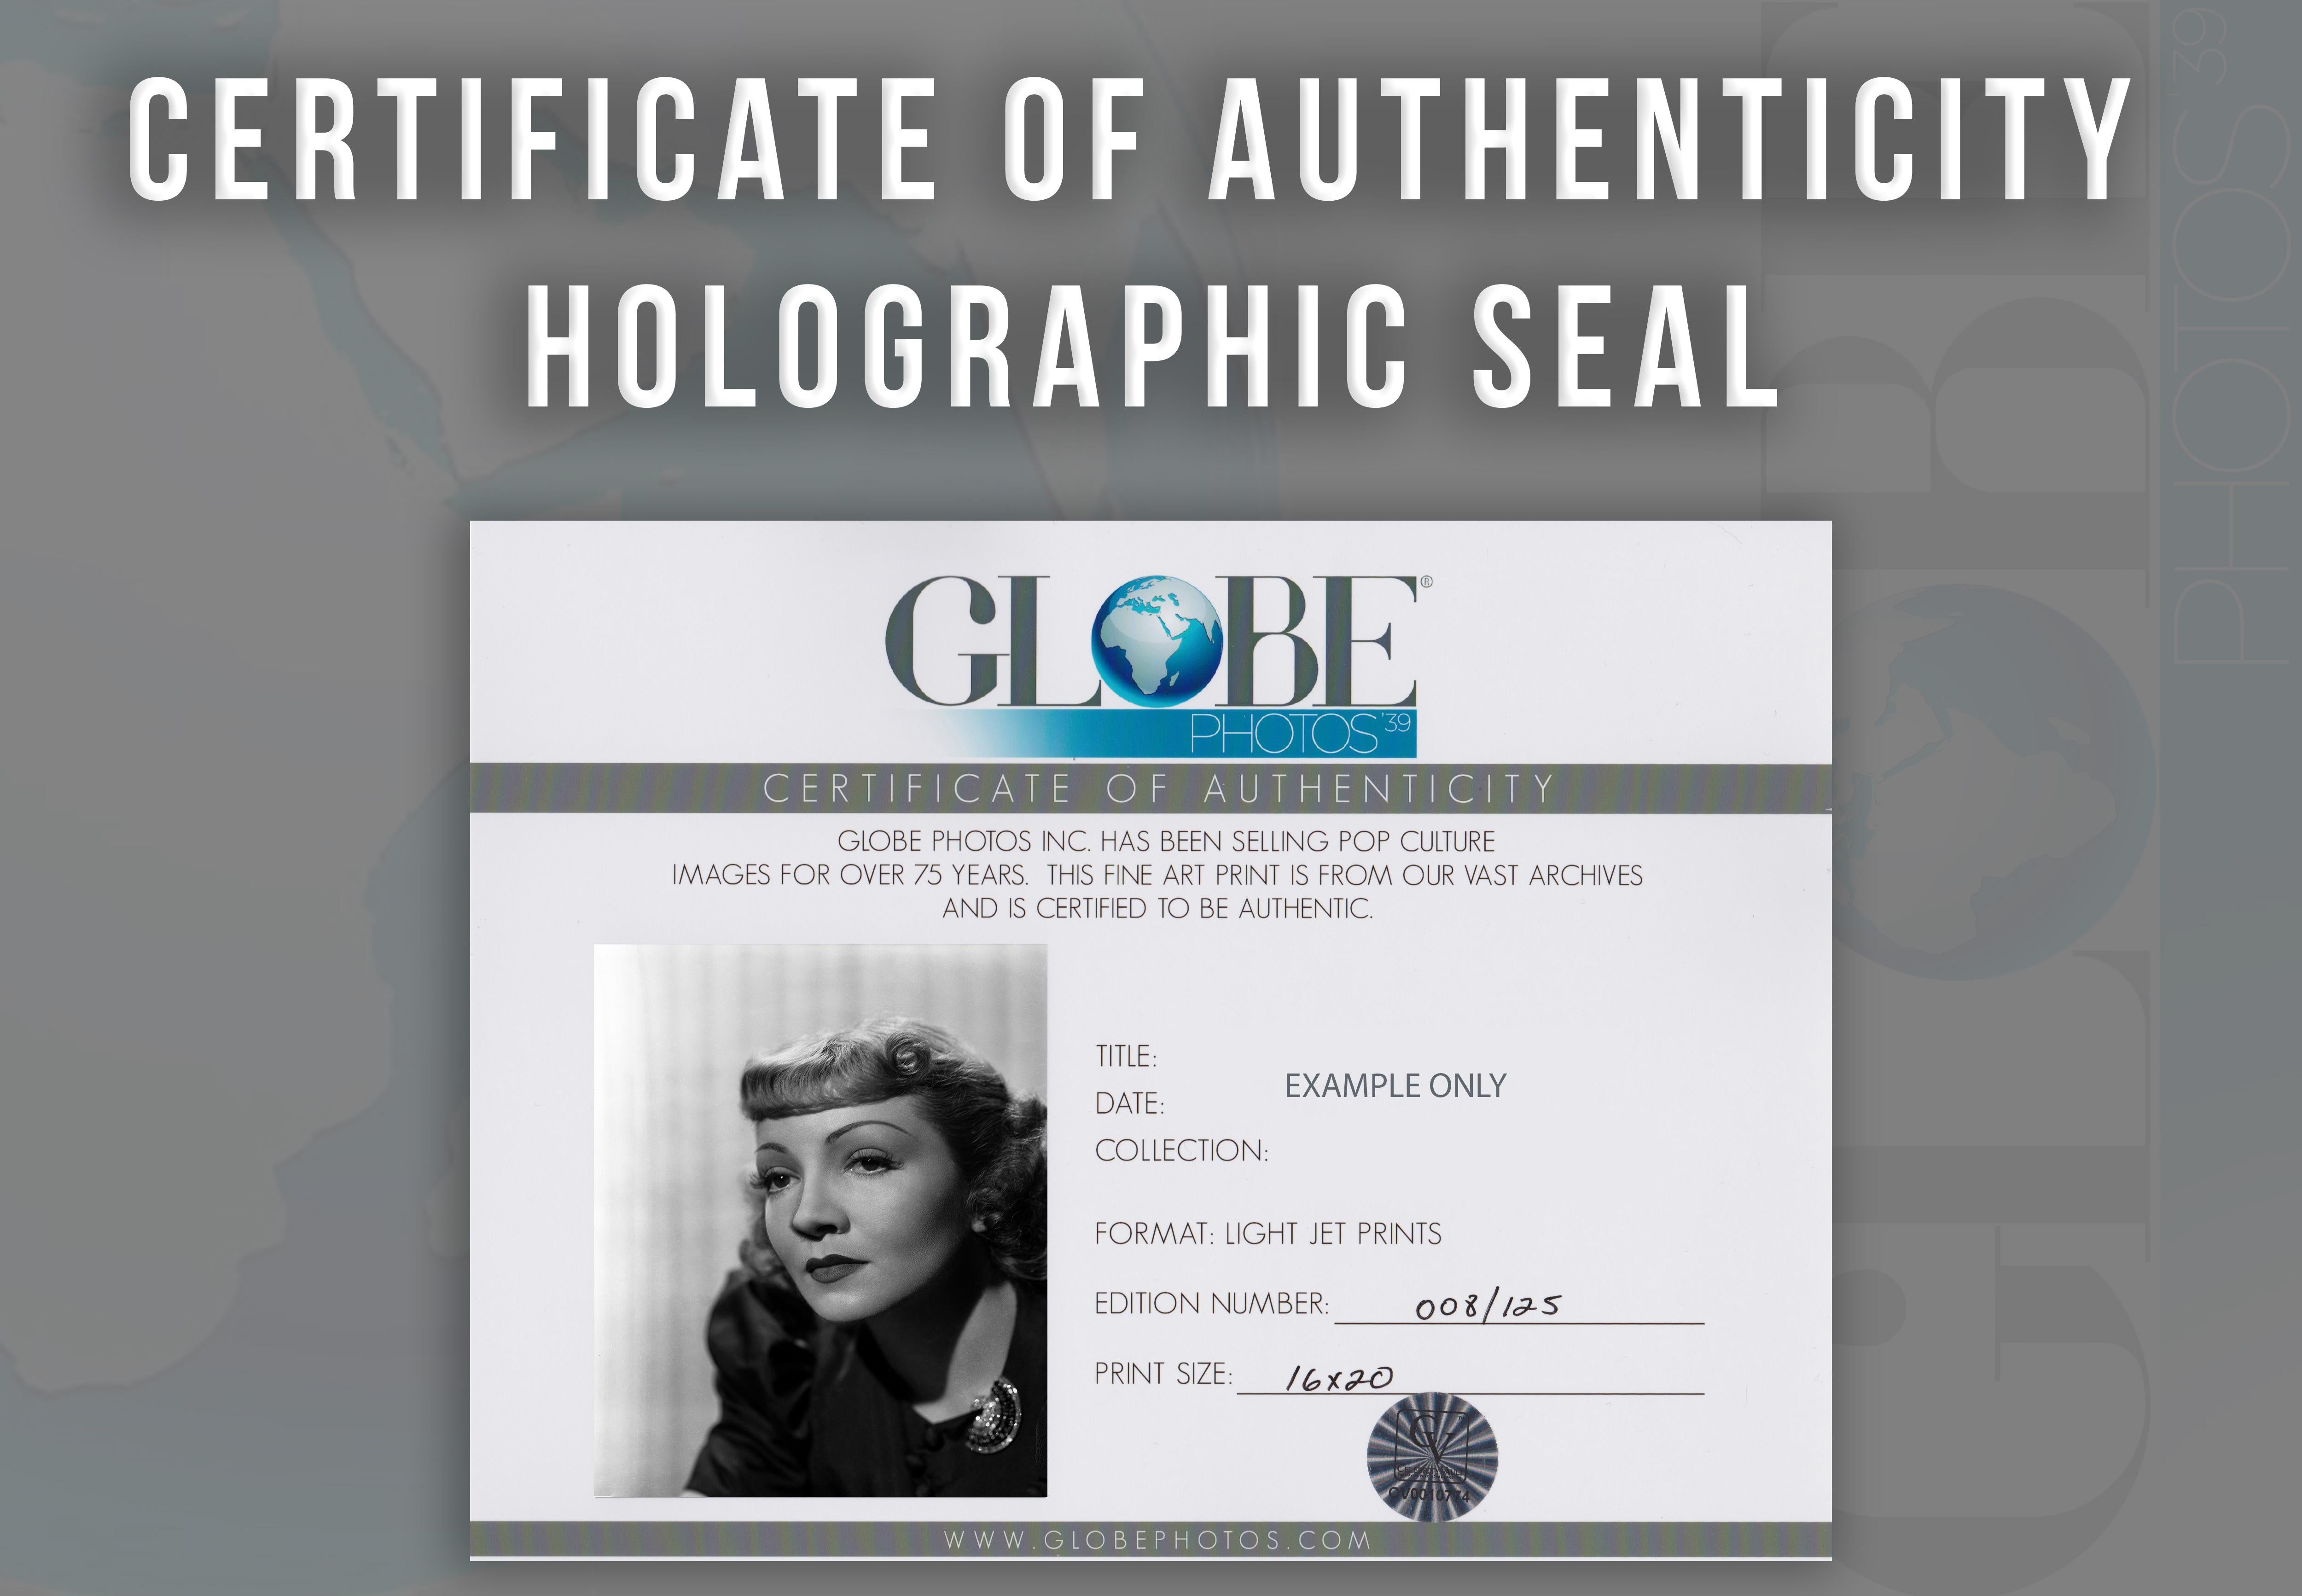 This black and white portrait features American film actress and a leading lady in Hollywood for over two decades, Claudette Colbert. Colbert is featured here looking away for a closeup classical studio portrait.

This image is credited to Globe